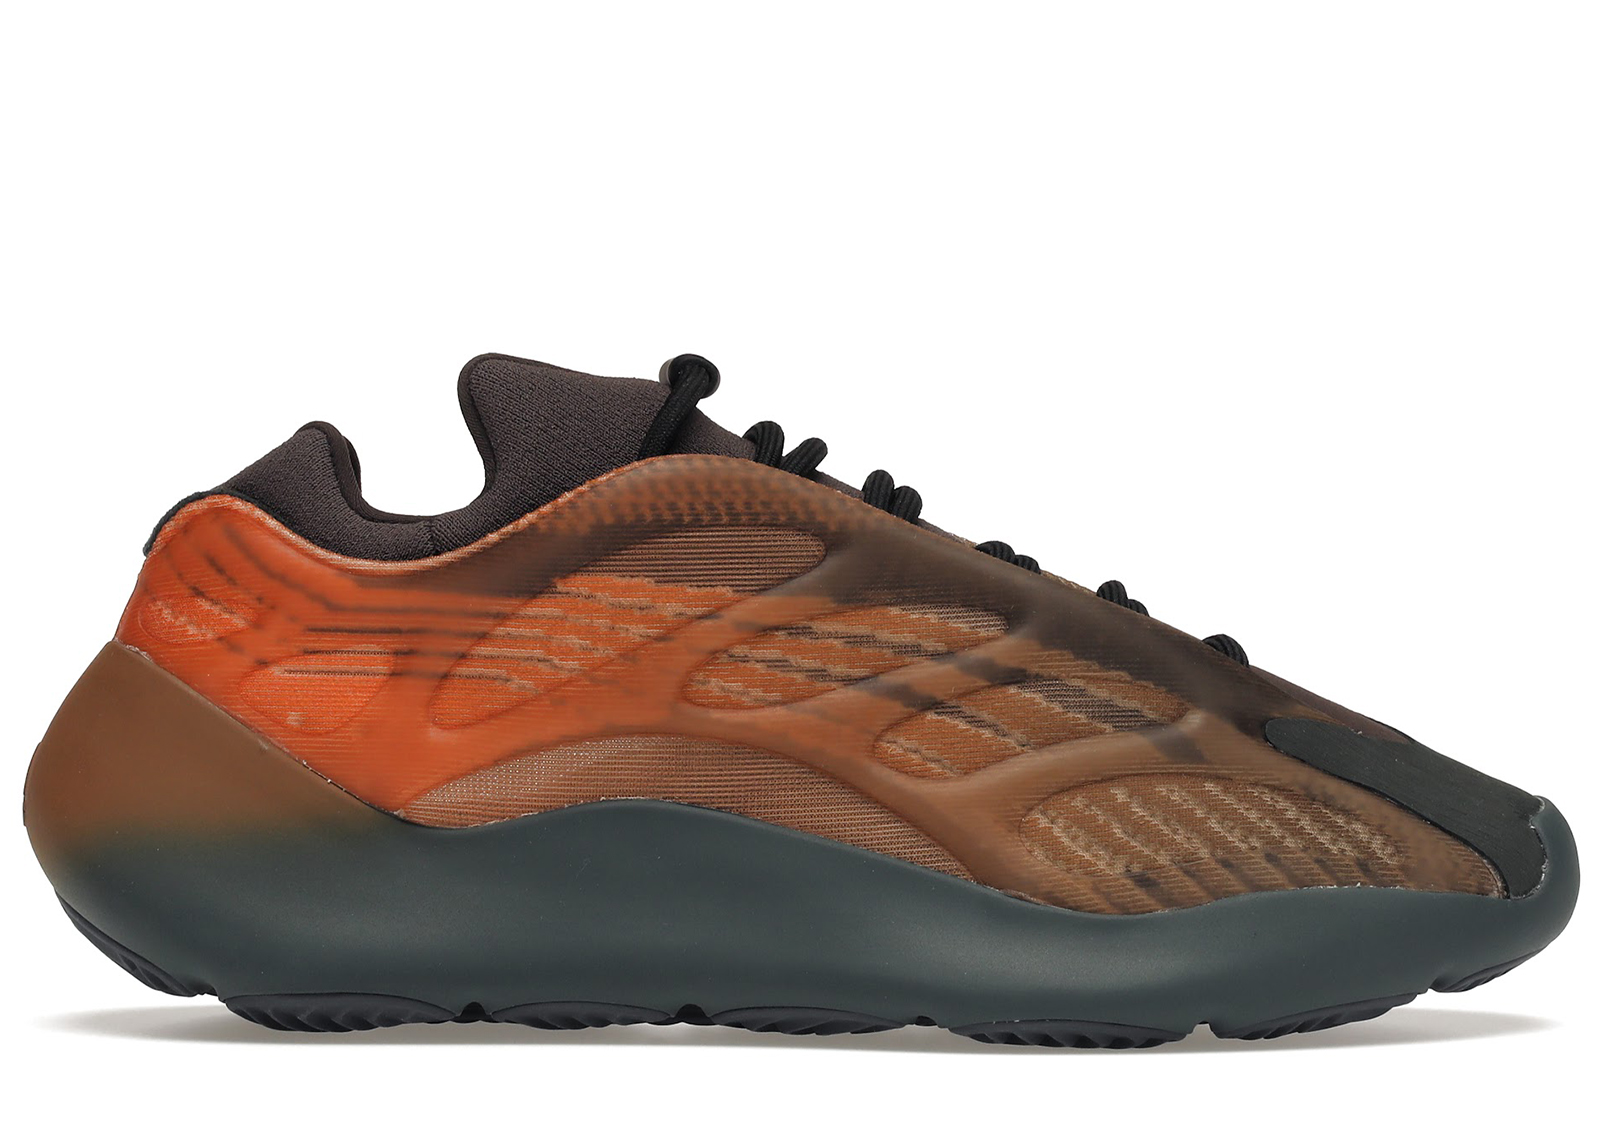 adidas Yeezy 700 V3 Clay Brown Men's - GY0189 - US